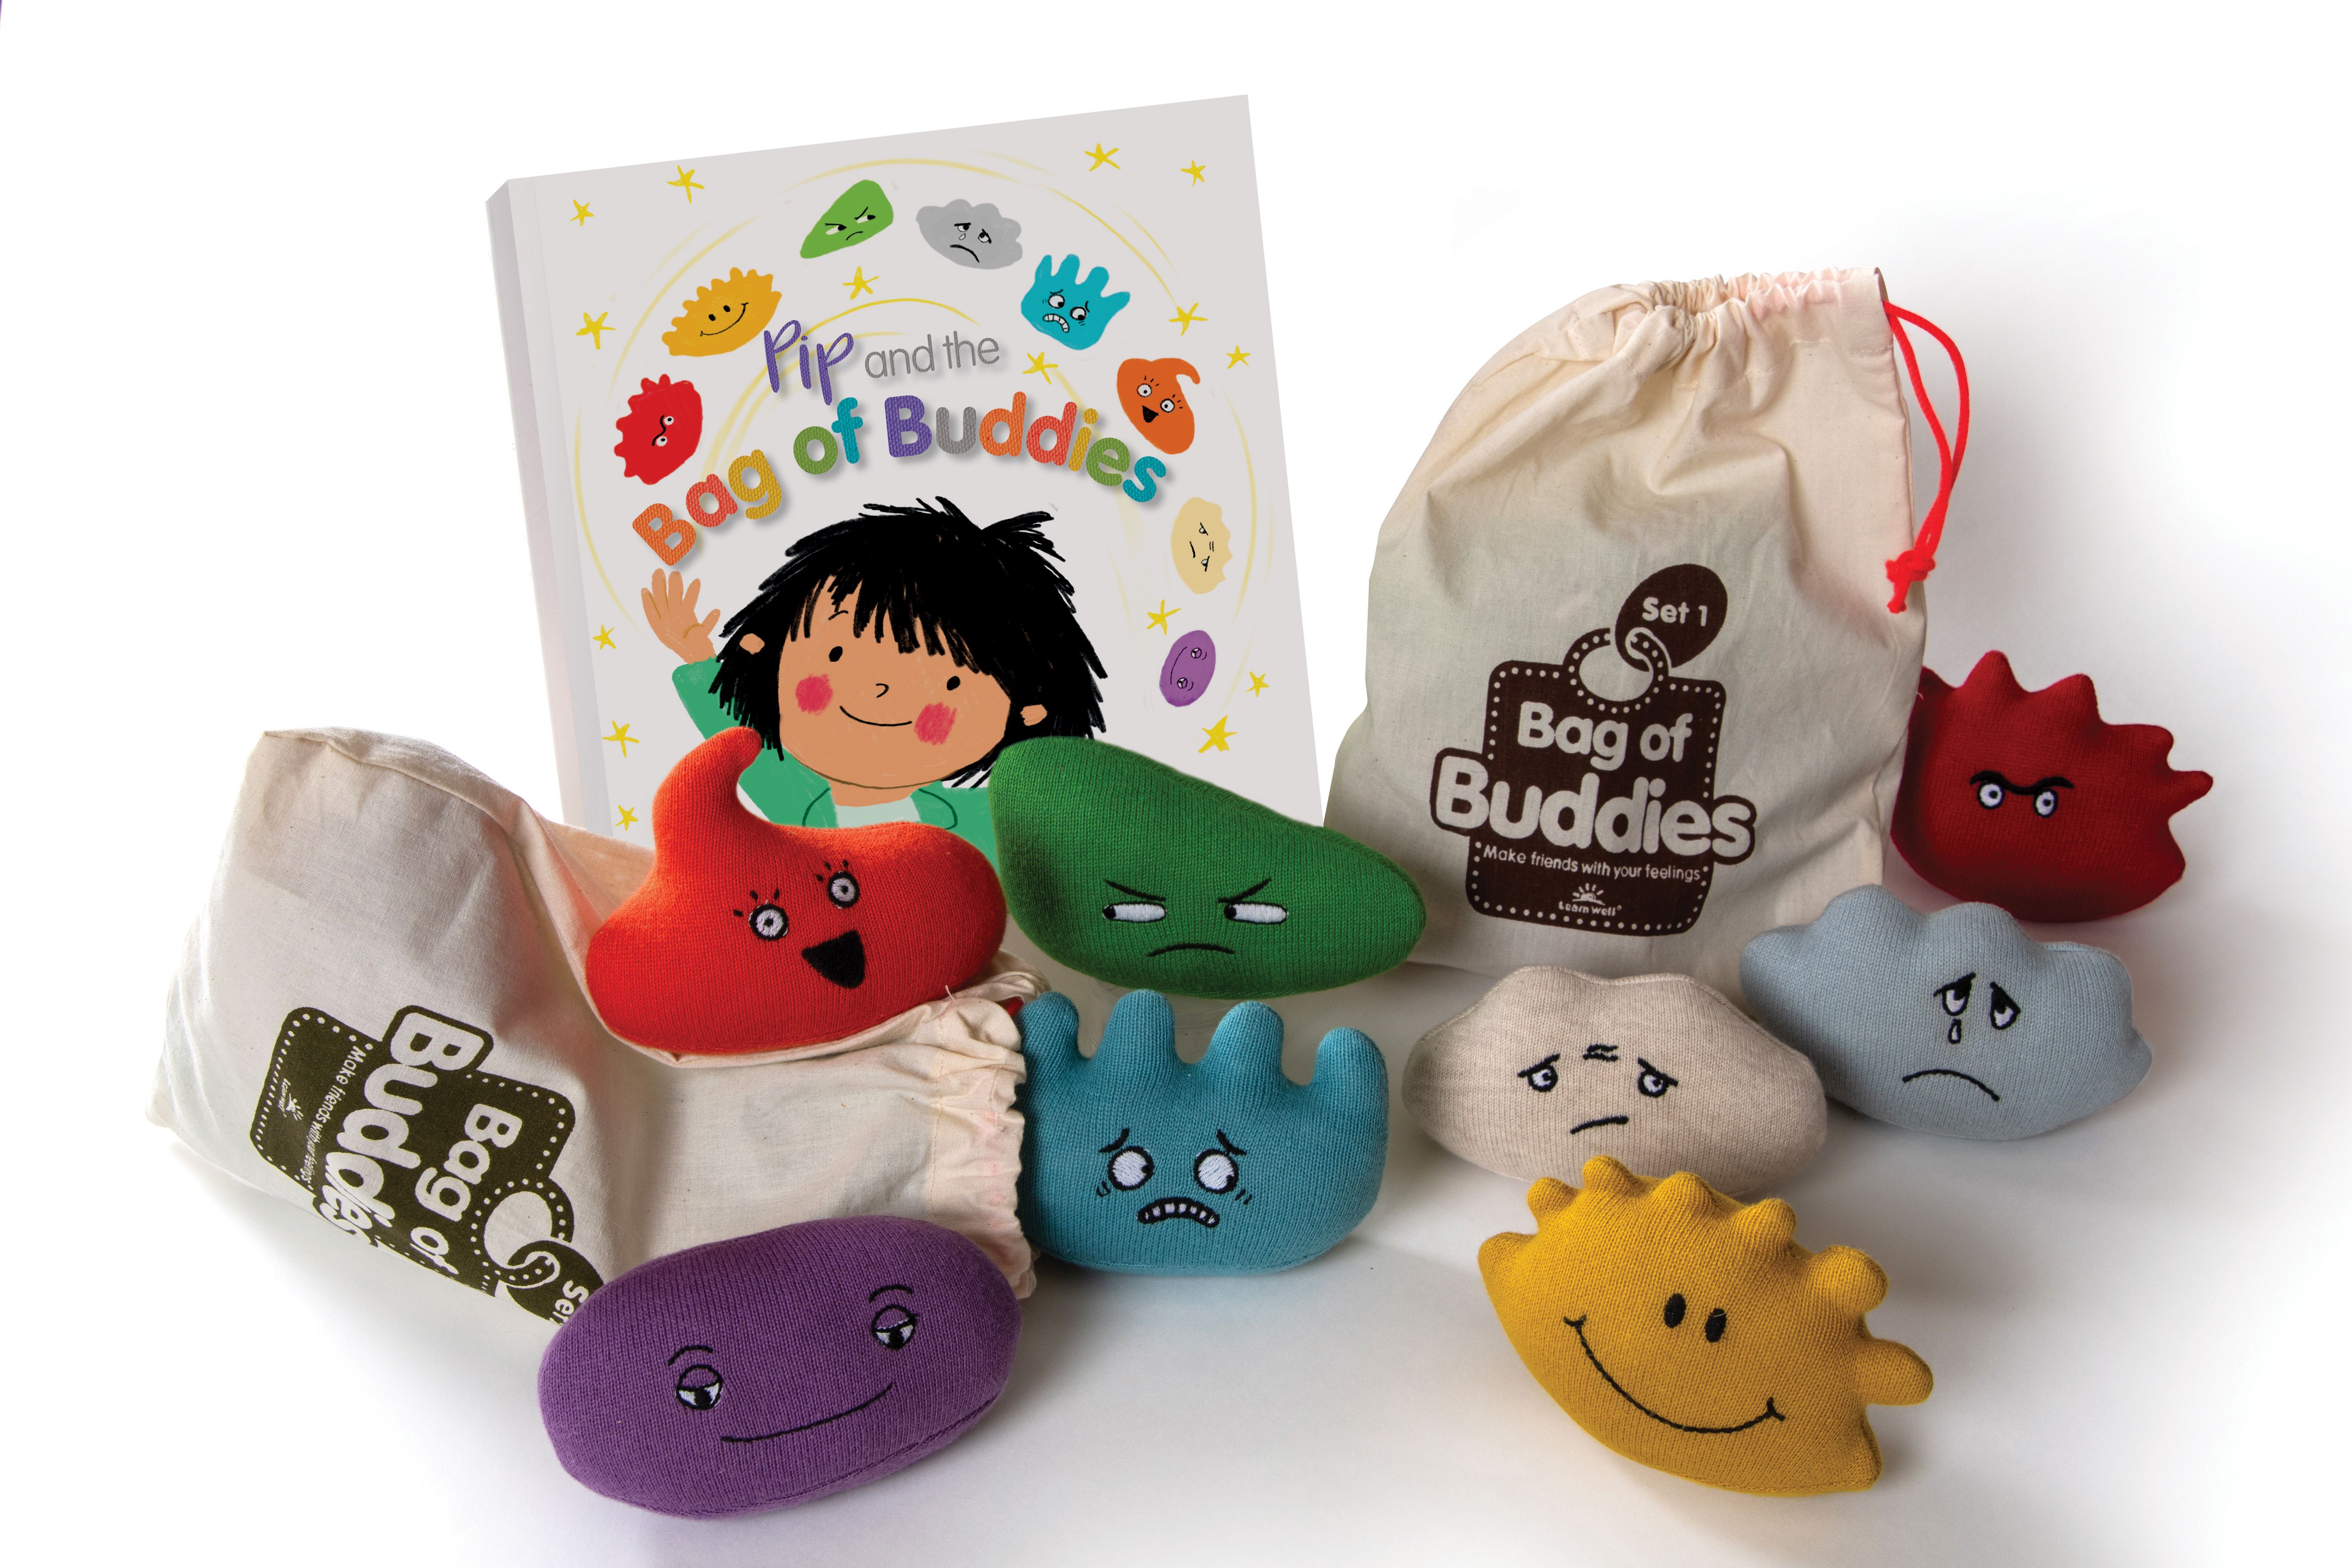 Pip and the Bag of Buddies Kit